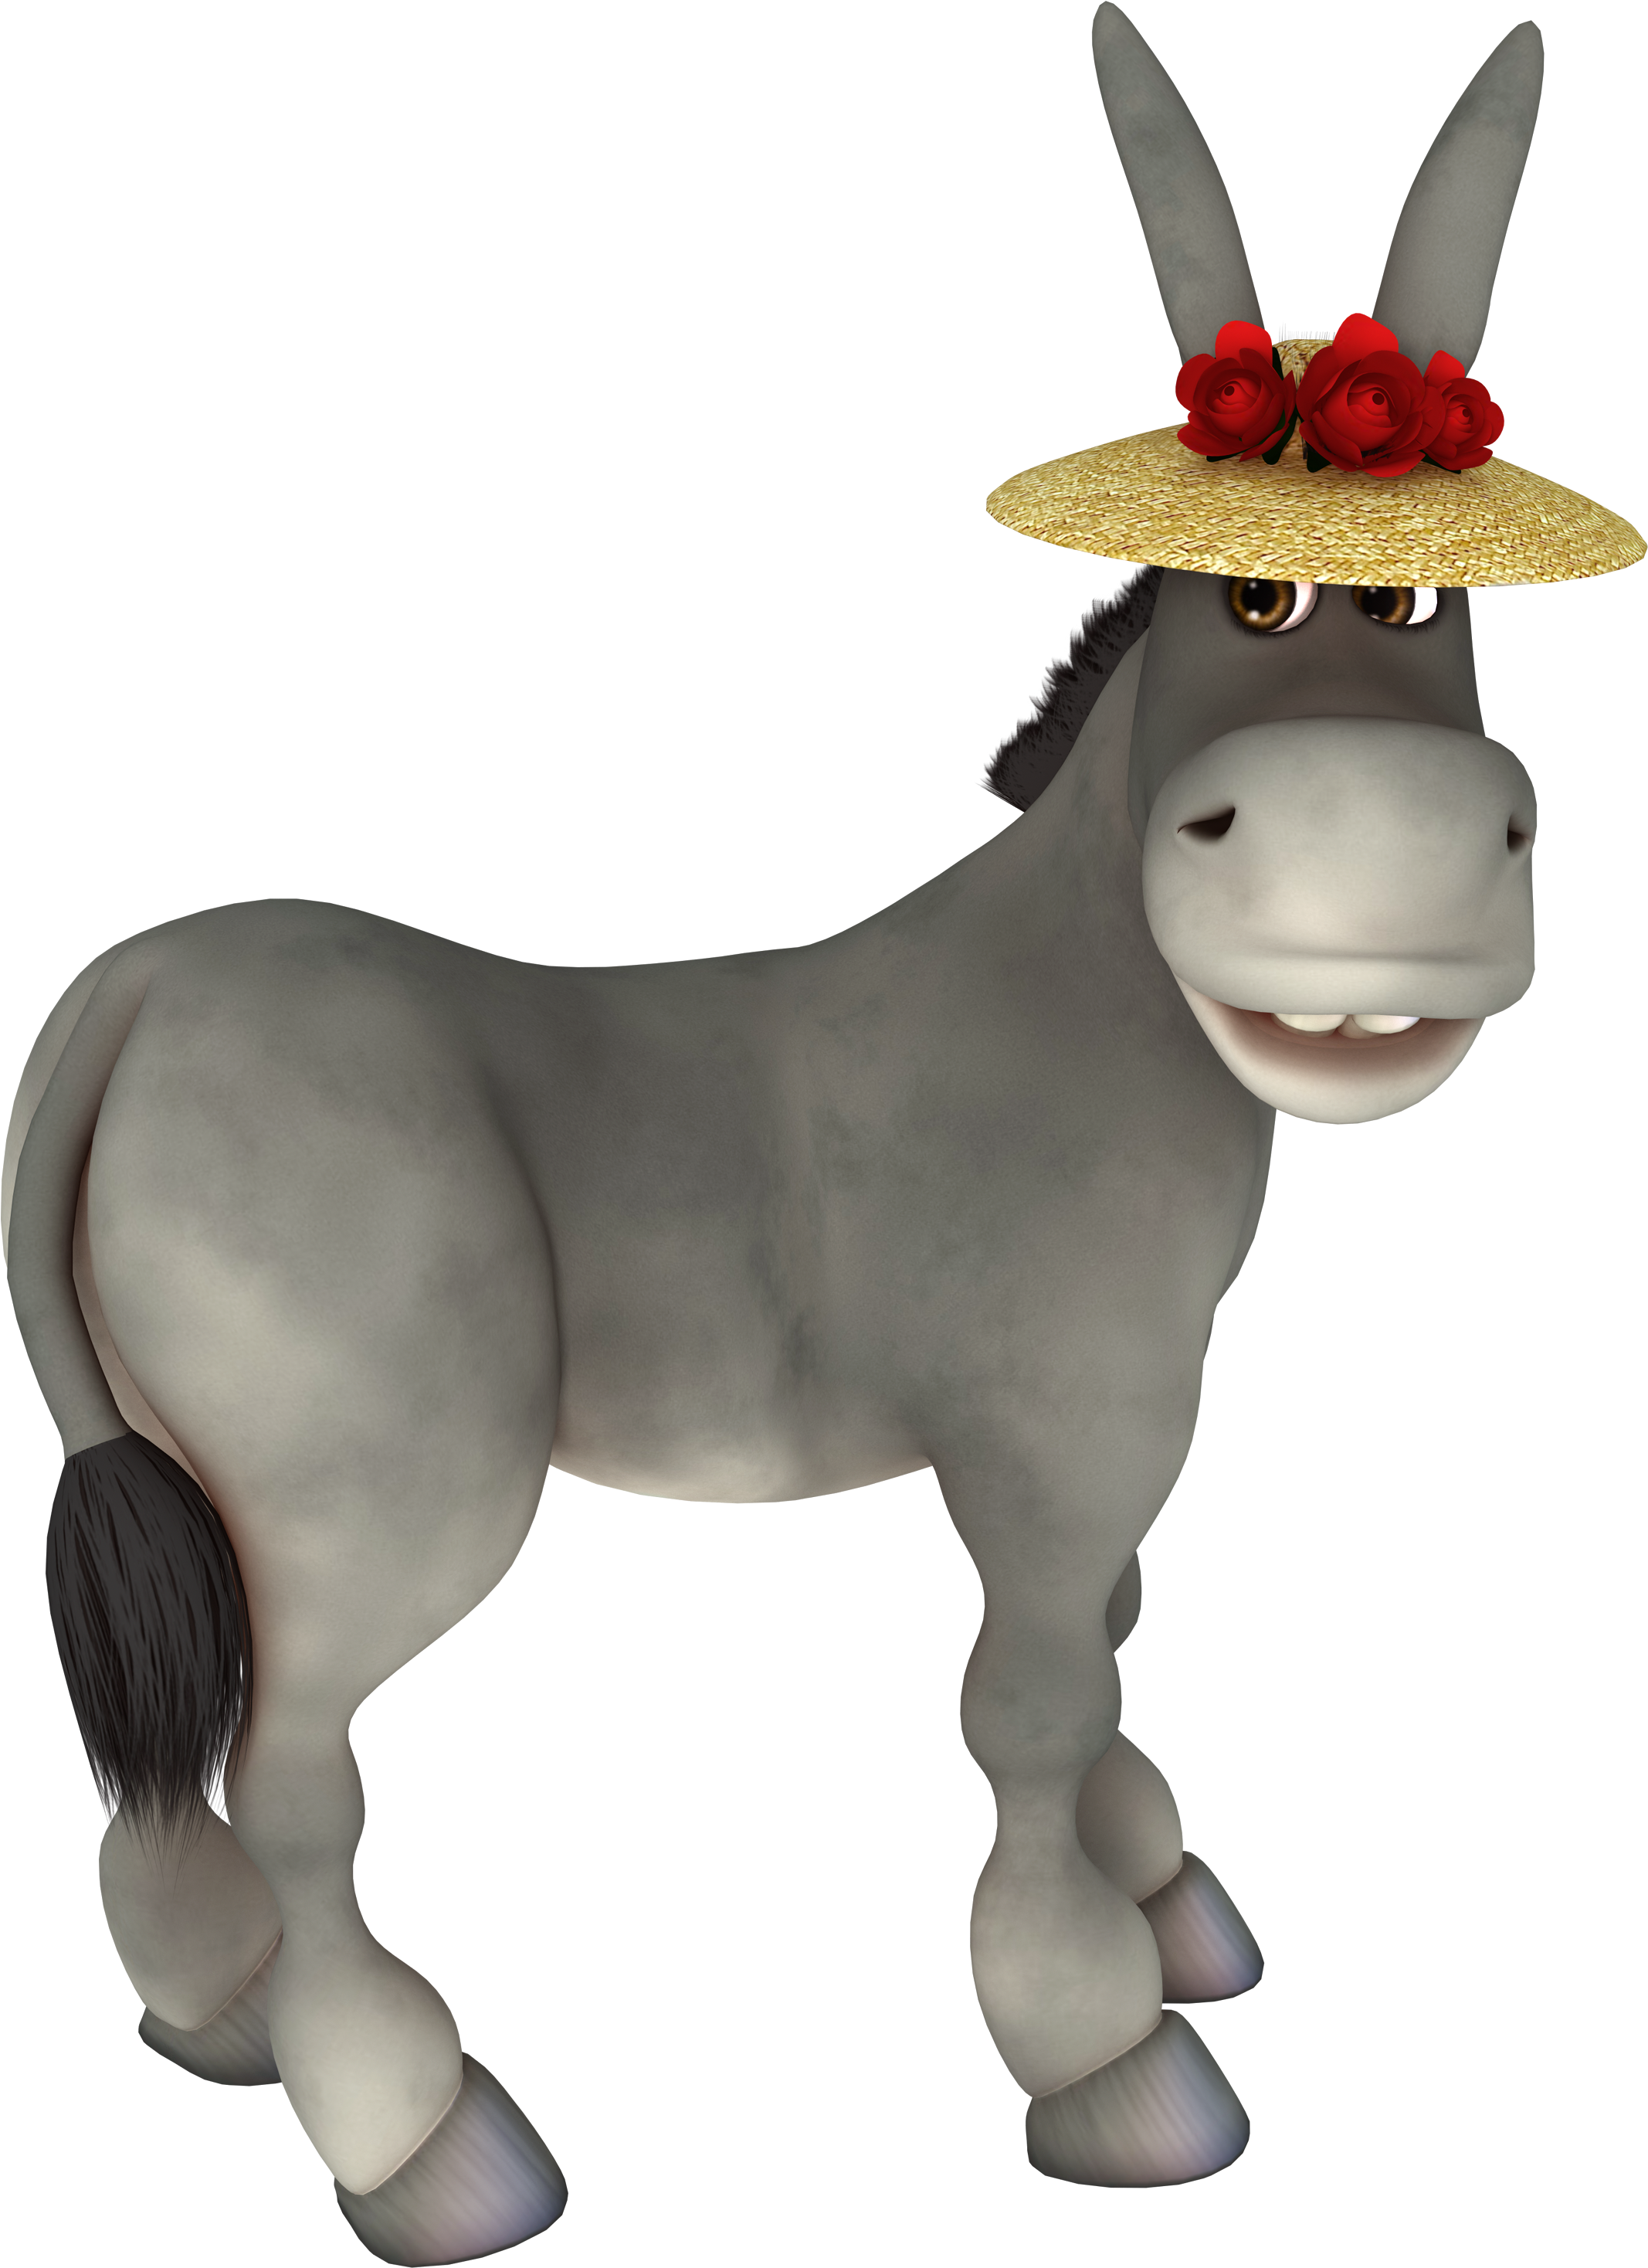 Download Shrek And Donkey - Shrek And Donkey Png PNG Image with No  Background 